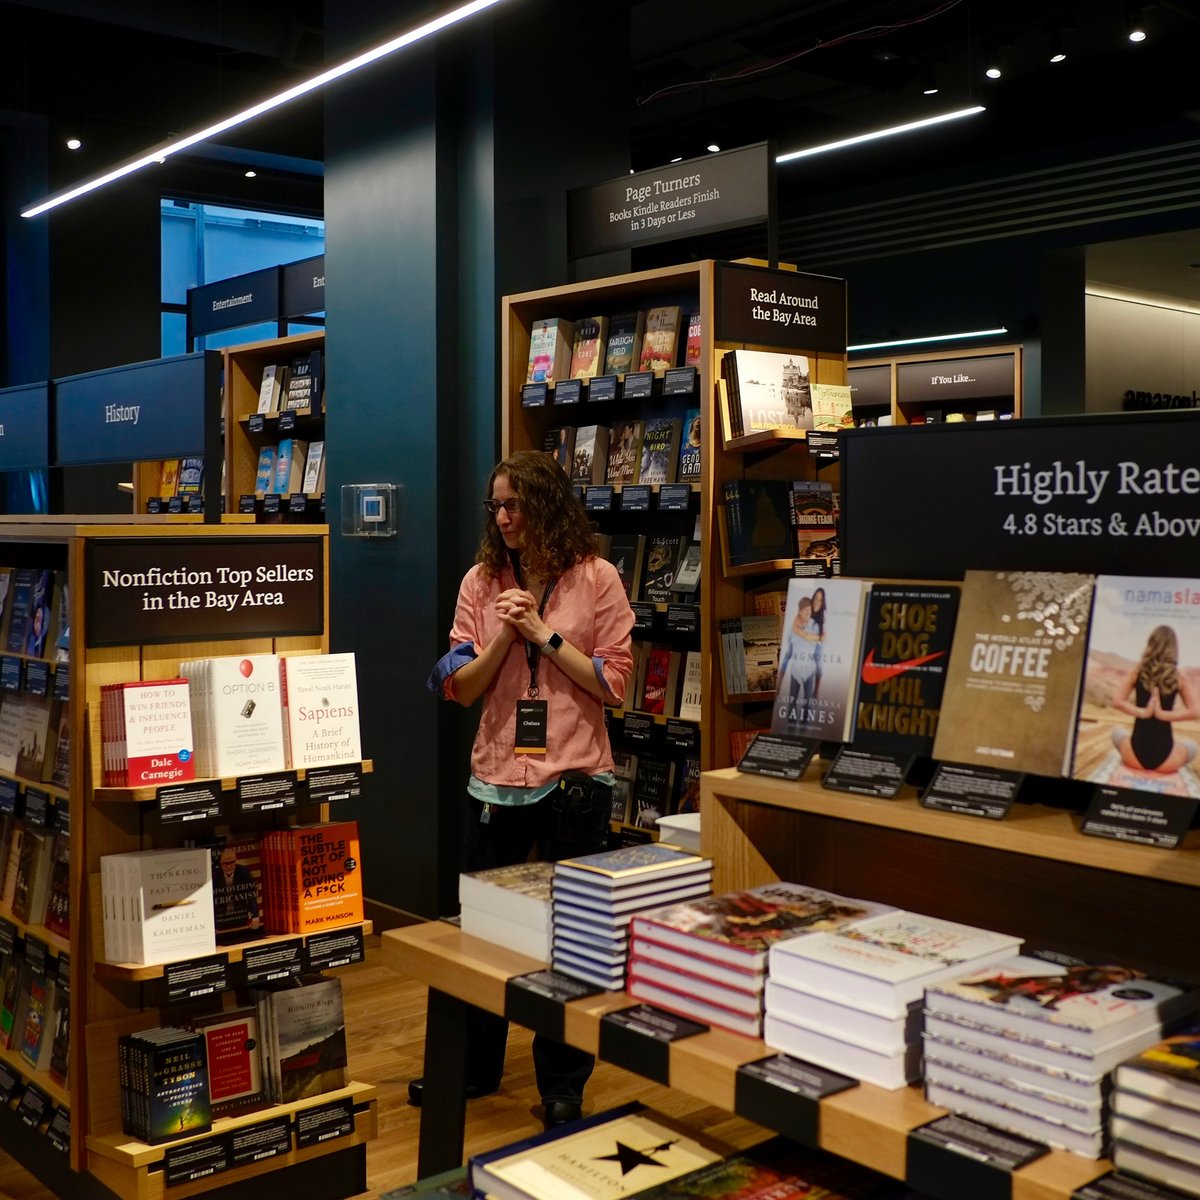 Books opens first Bay Area store in San Jose's Santana